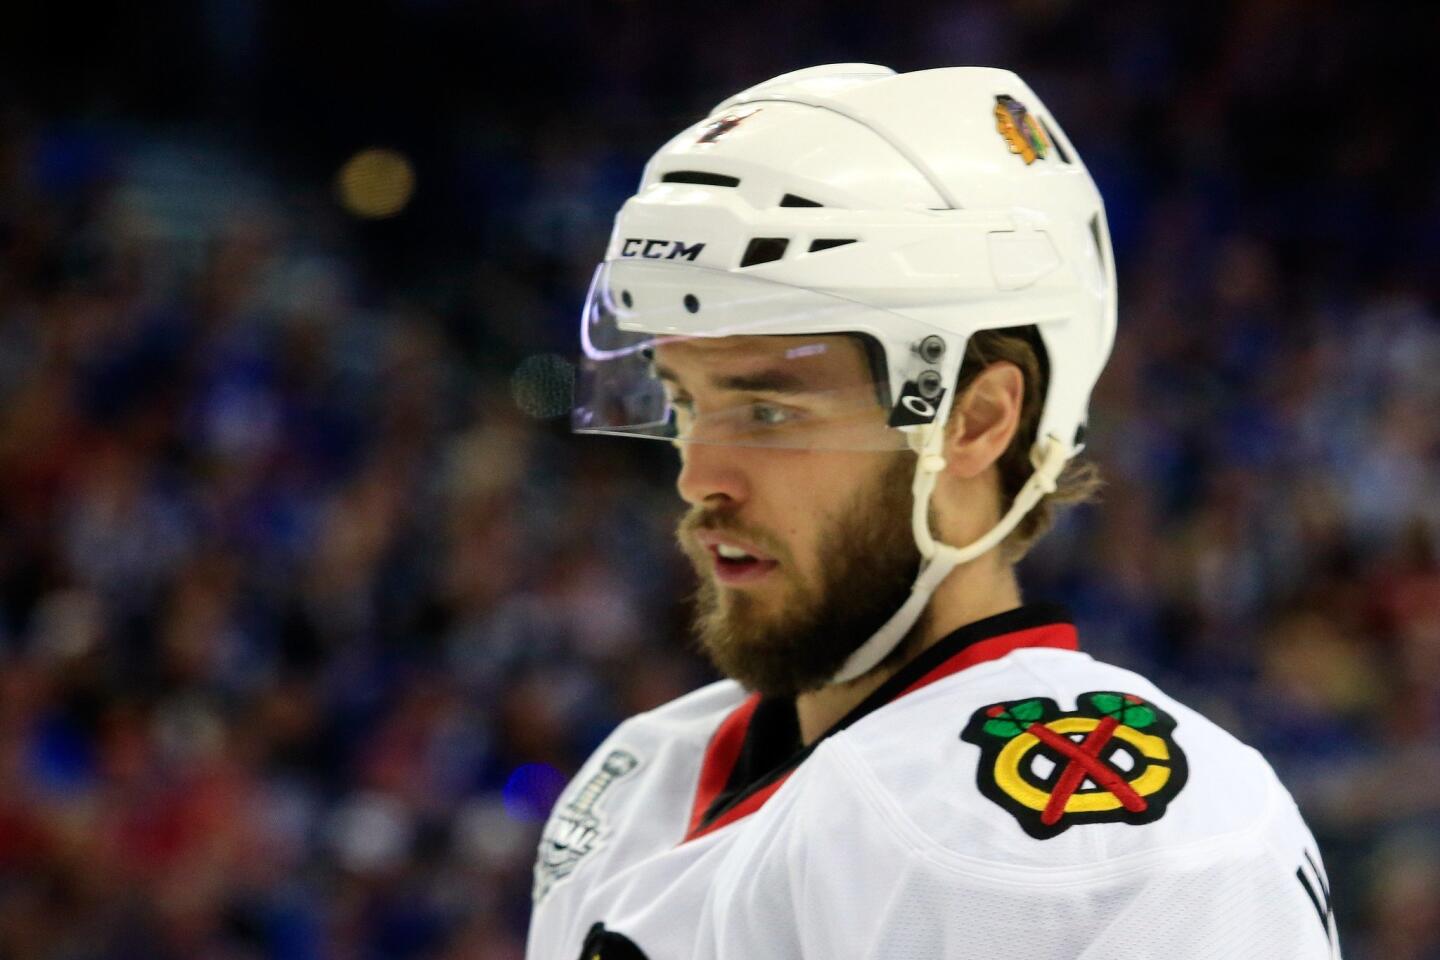 Contract status: Signed through 2018-19, cap hit: $4.1 million 2014-15 stats: 82 games, 3 goals, 16 assists, 19 points, 44 penalty minutes Outlook: Perhaps the most underrated Hawks player, veteran carries a friendly cap hit and will be a fixture on the blue line.